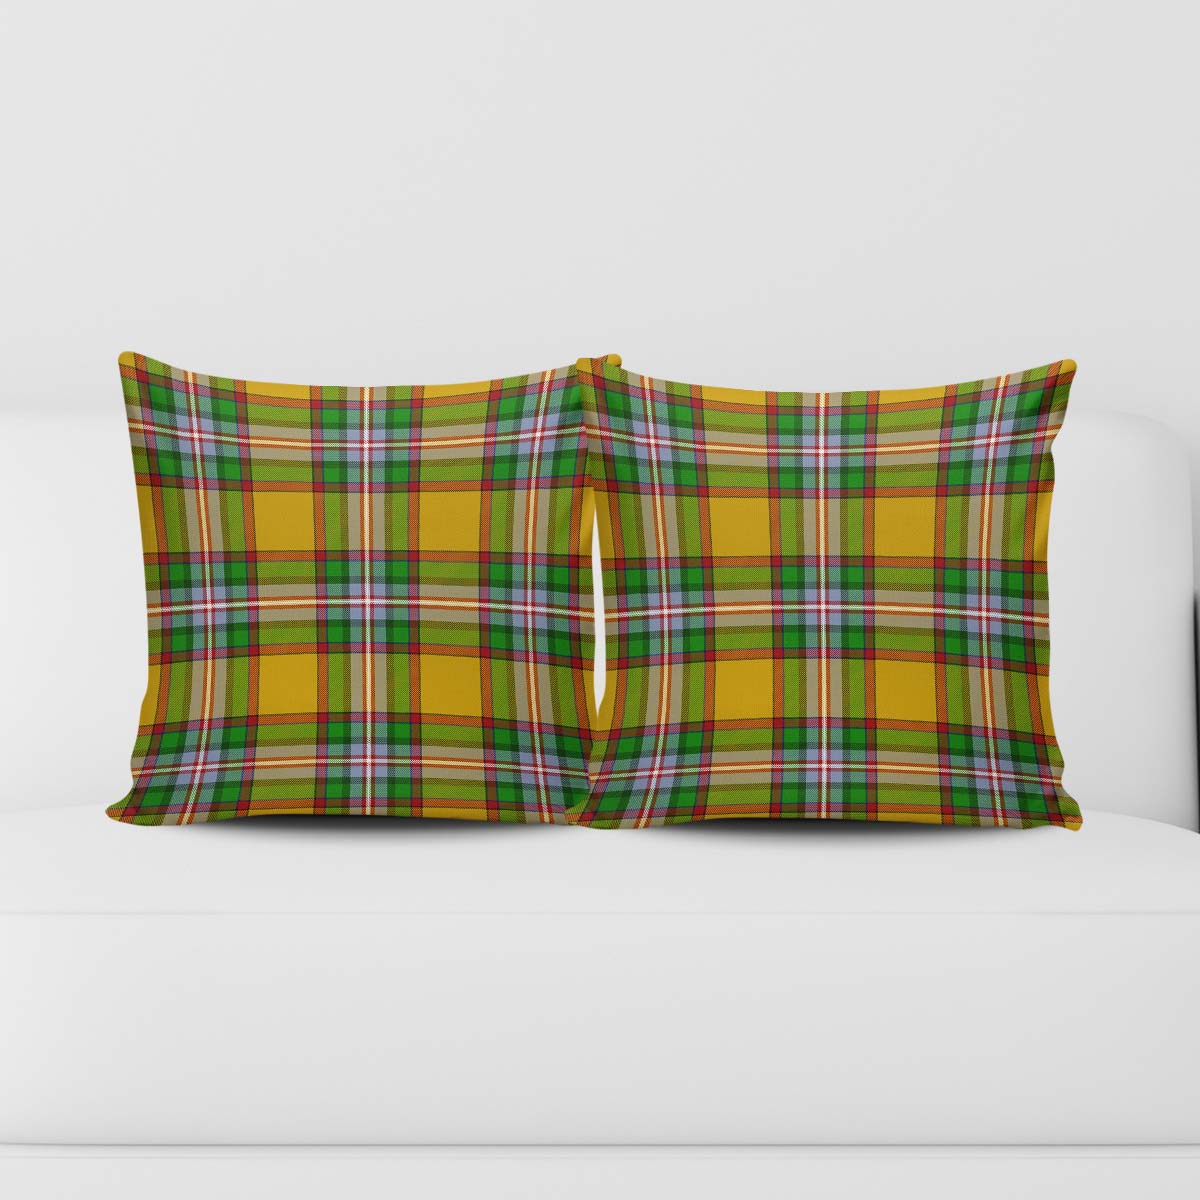 Essex County Canada Tartan Pillow Cover Square Pillow Cover - Tartanvibesclothing